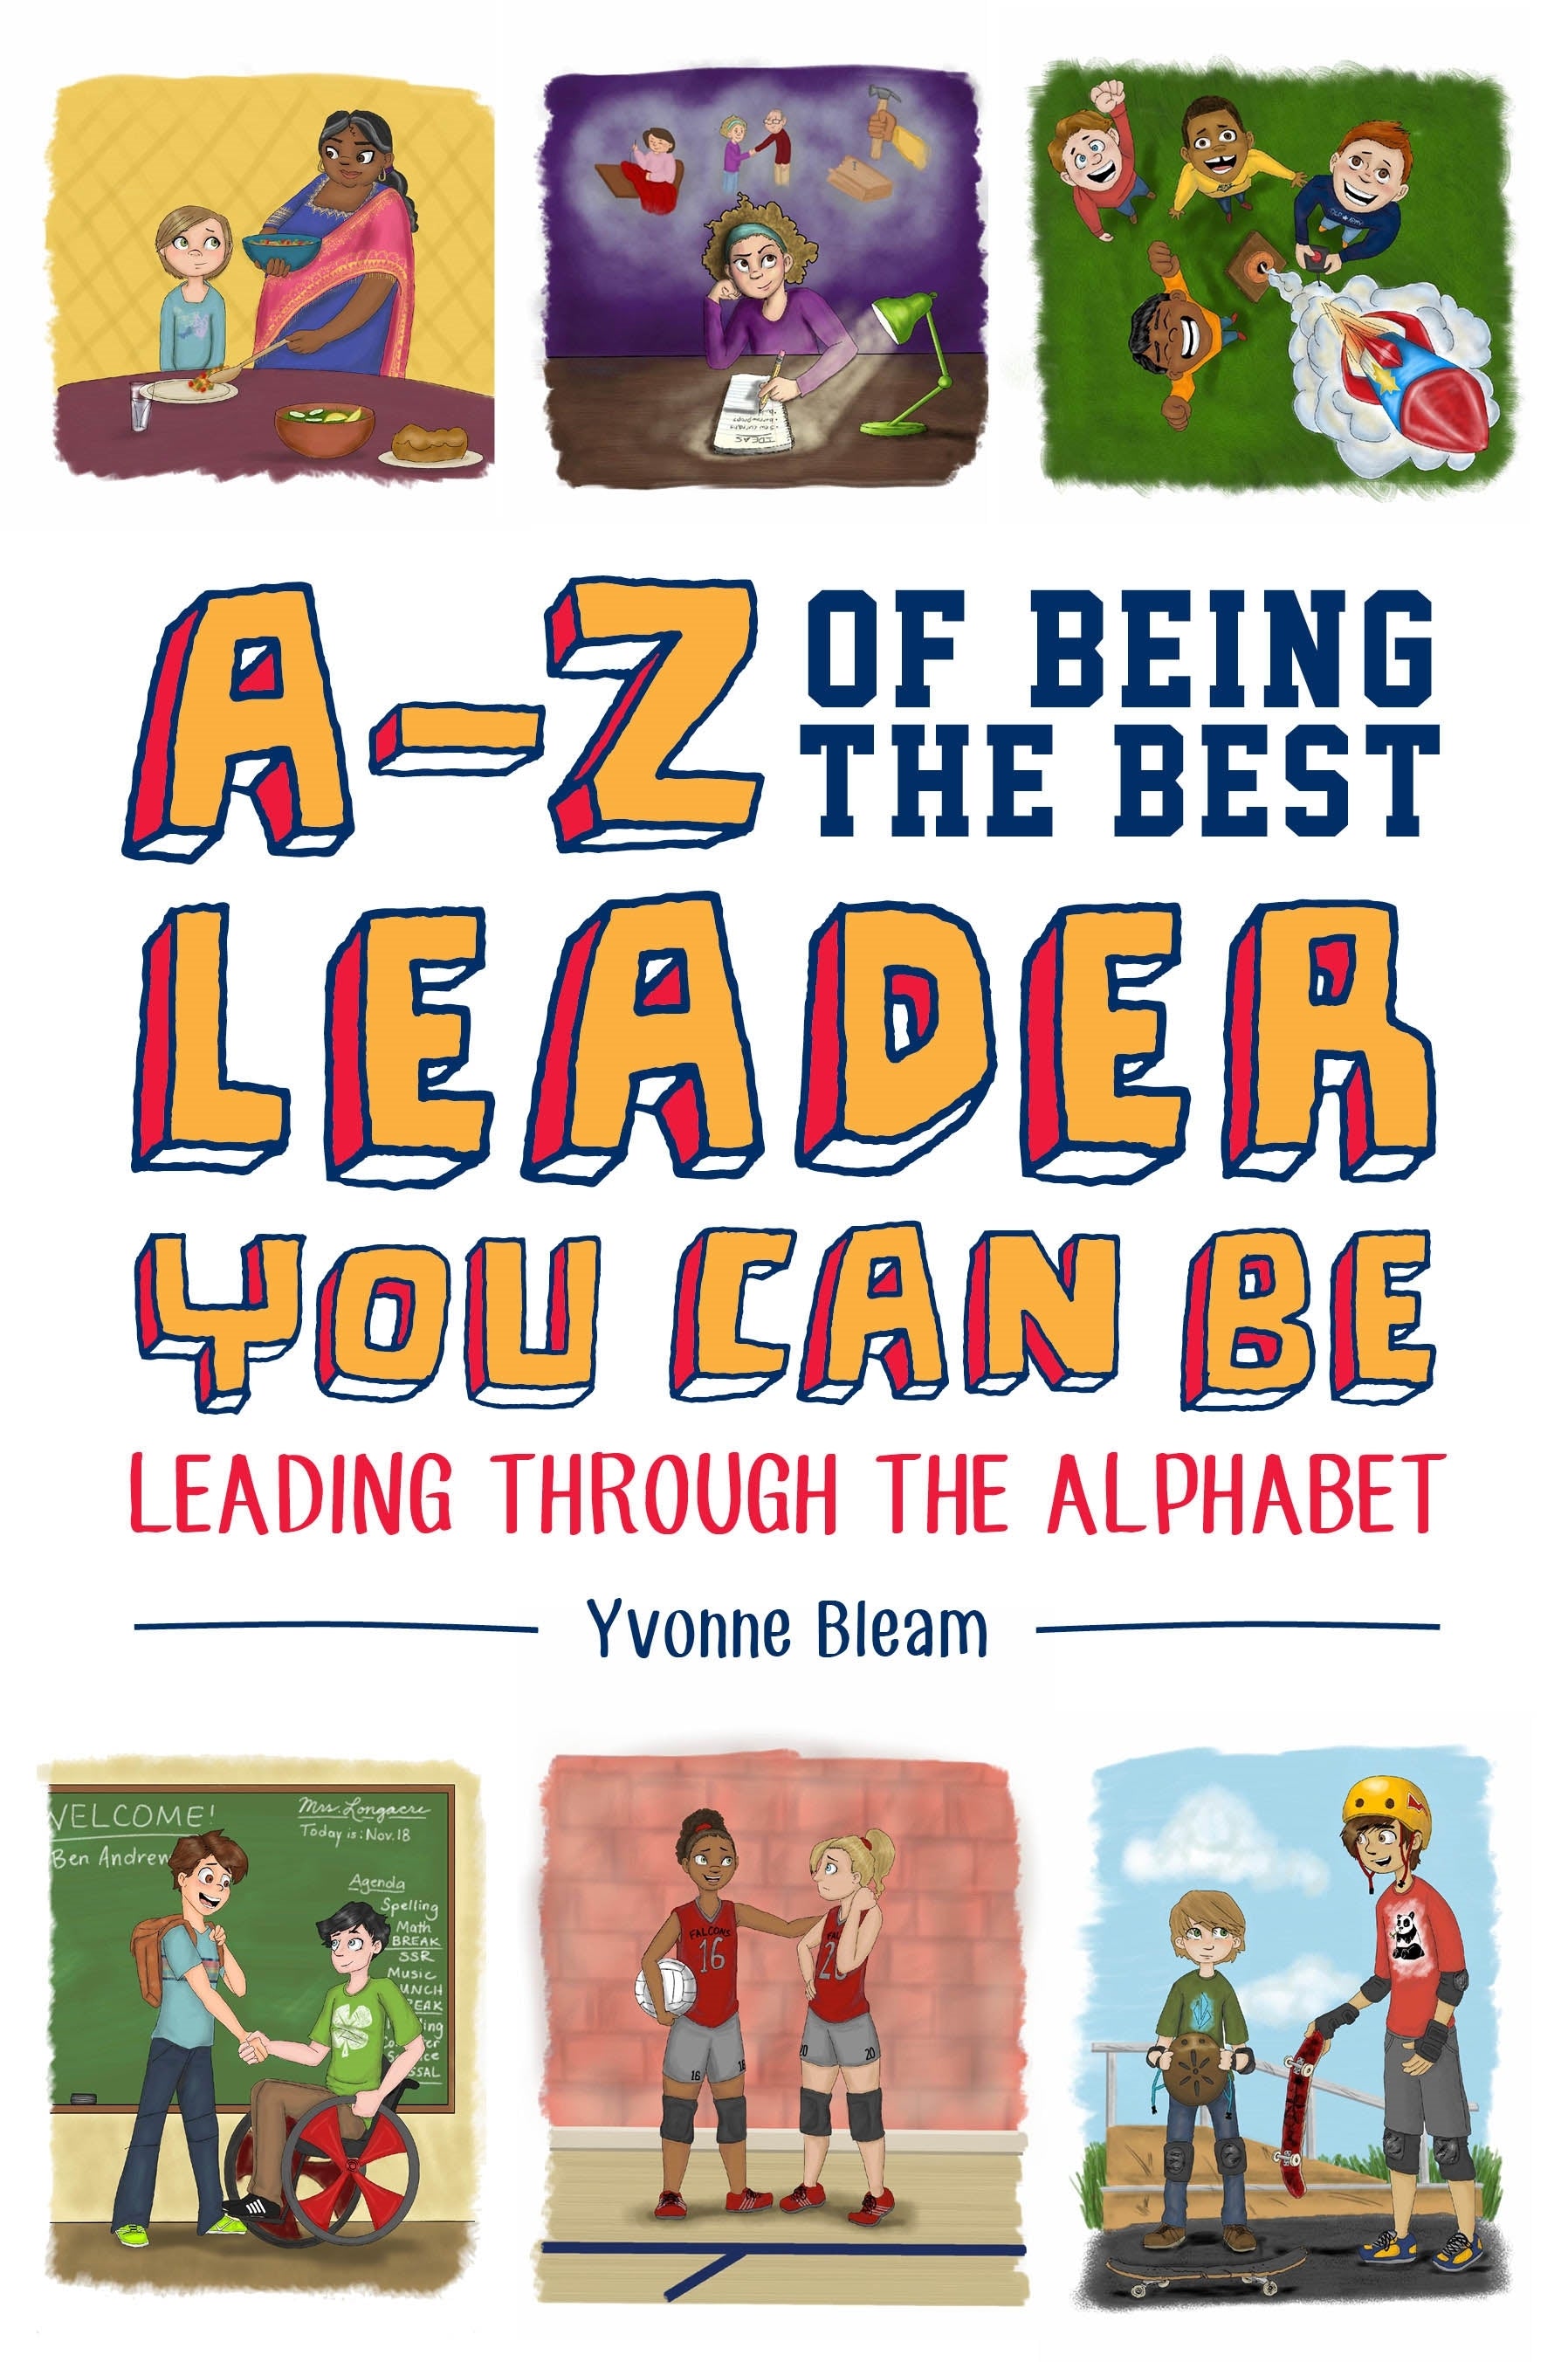 A-Z of Being the Best Leader You Can Be by Yvonne Bleam